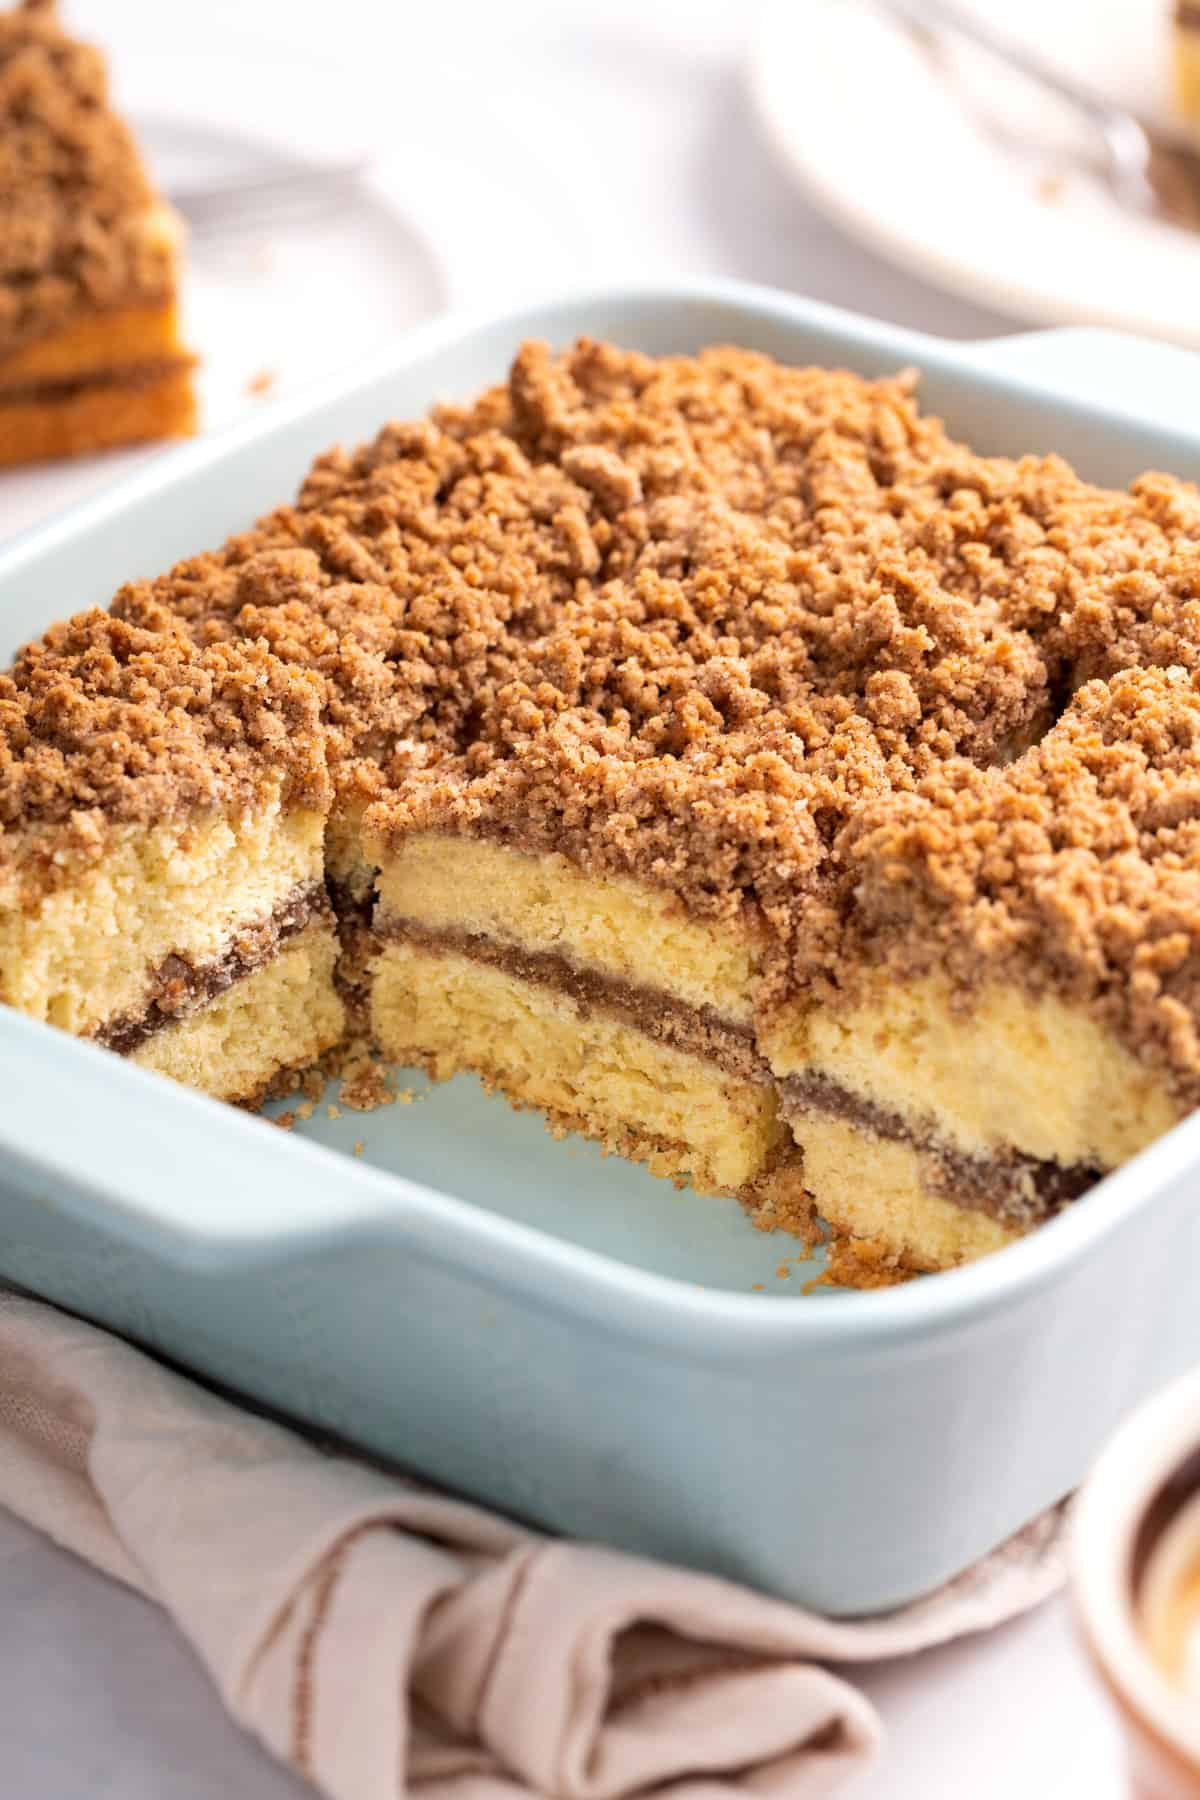 sliced coffee cake served in a blue 9x9 inch baking dish to show the cross section.